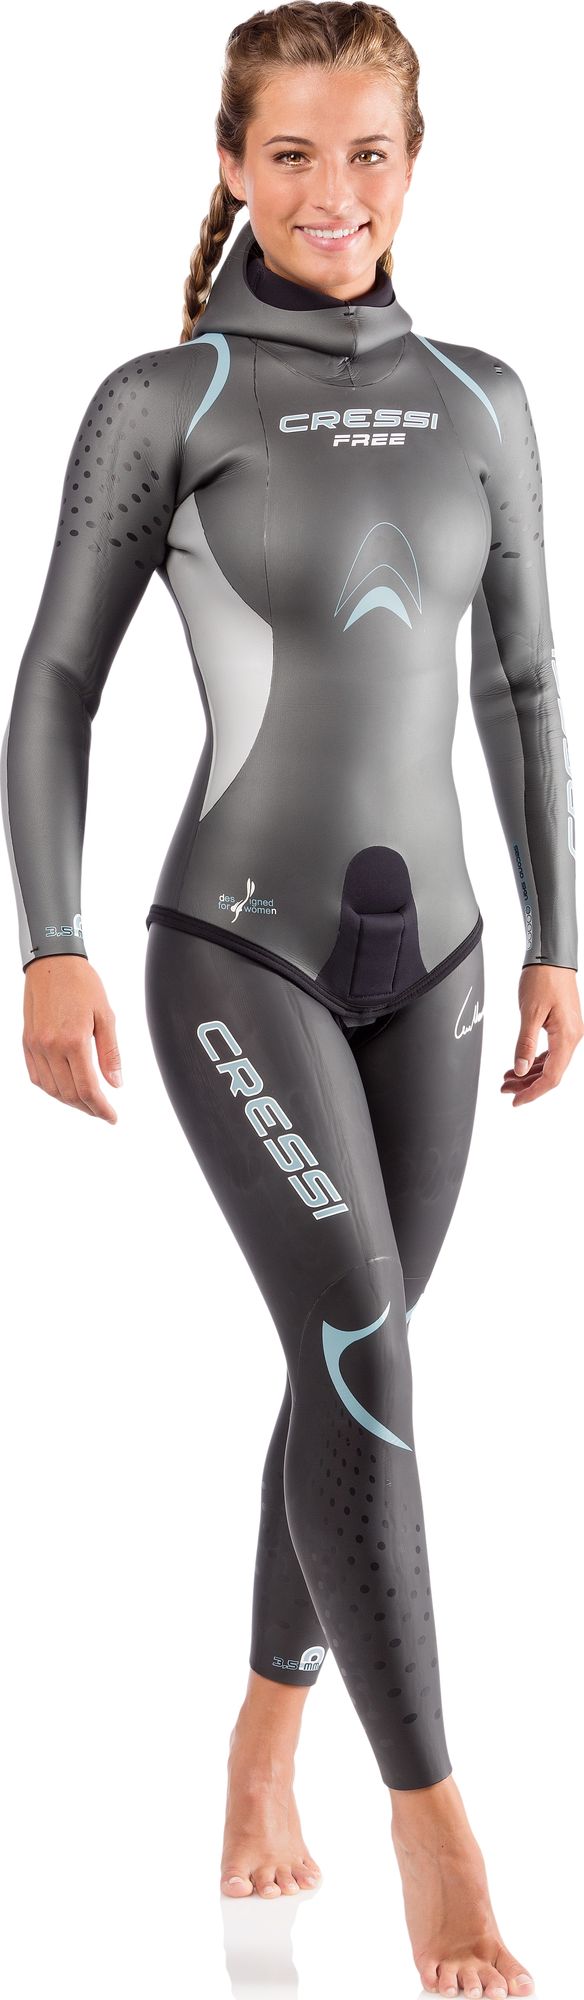 Cressi Free Wetsuit Lady muta donna apnea muta mute umid due pezz freediving neoprene wetsuit long sleeve two-pieces lady